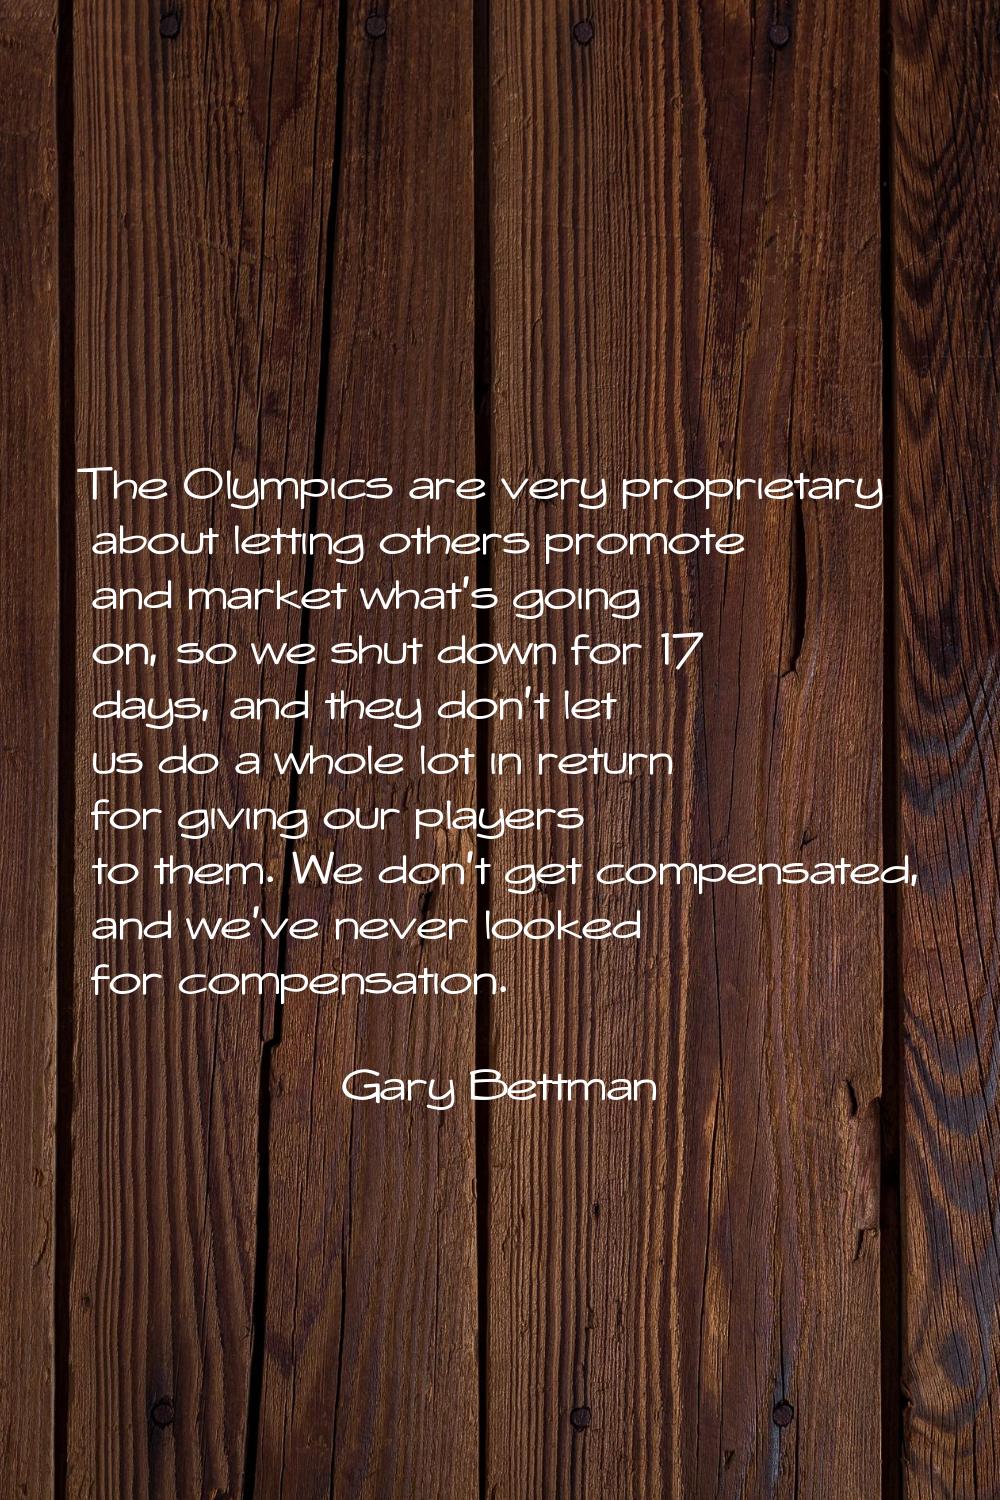 The Olympics are very proprietary about letting others promote and market what's going on, so we sh